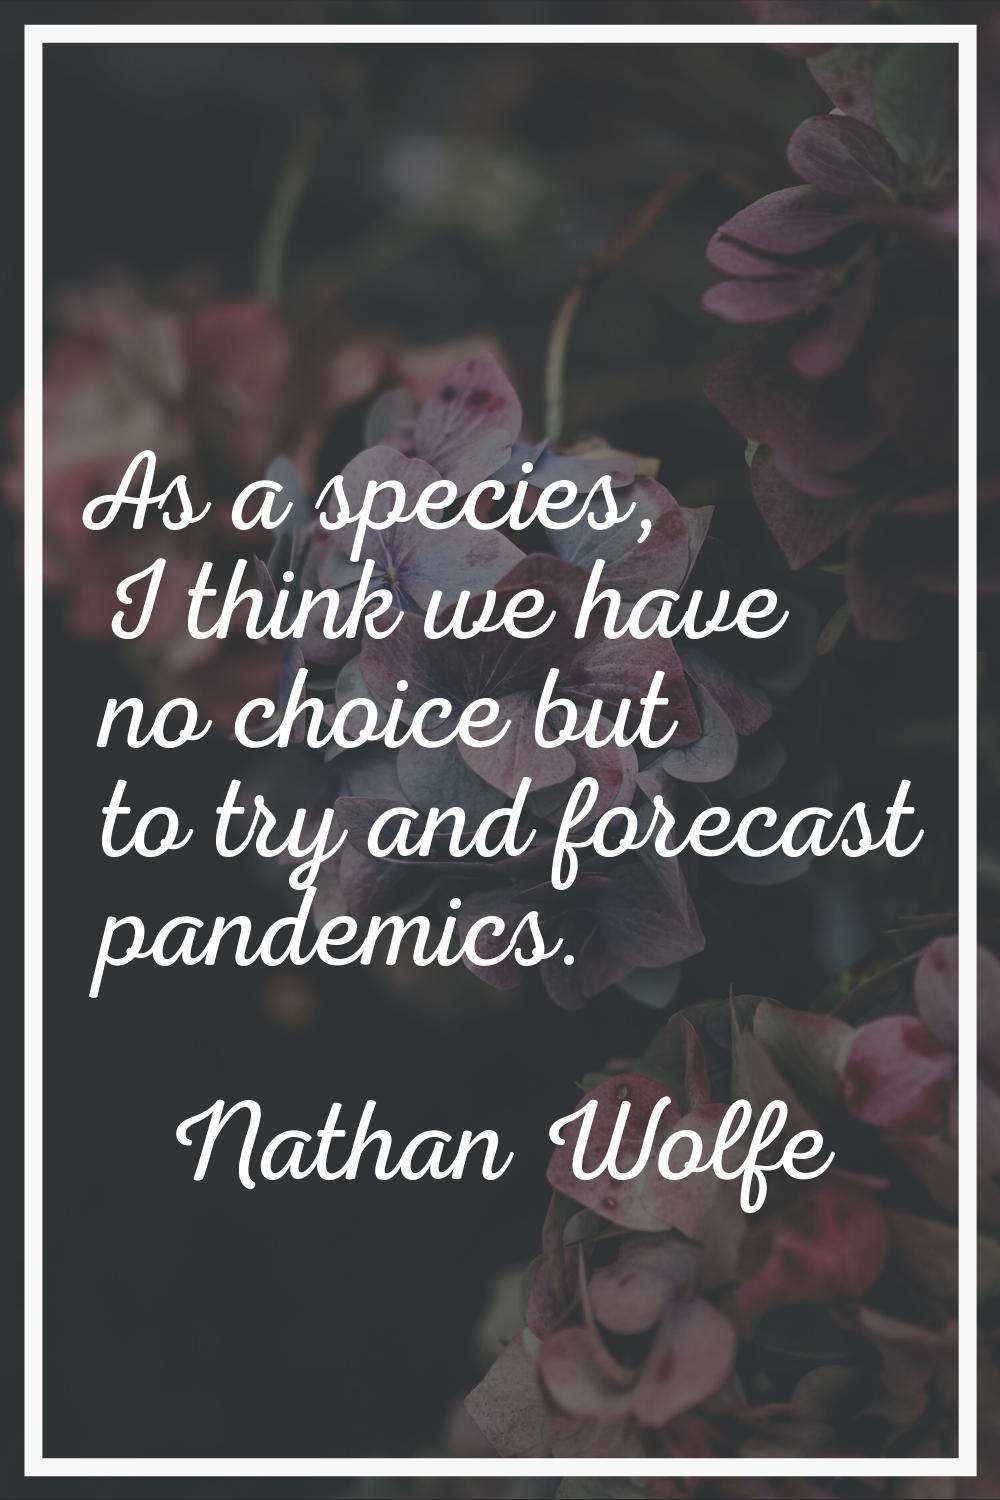 As a species, I think we have no choice but to try and forecast pandemics.